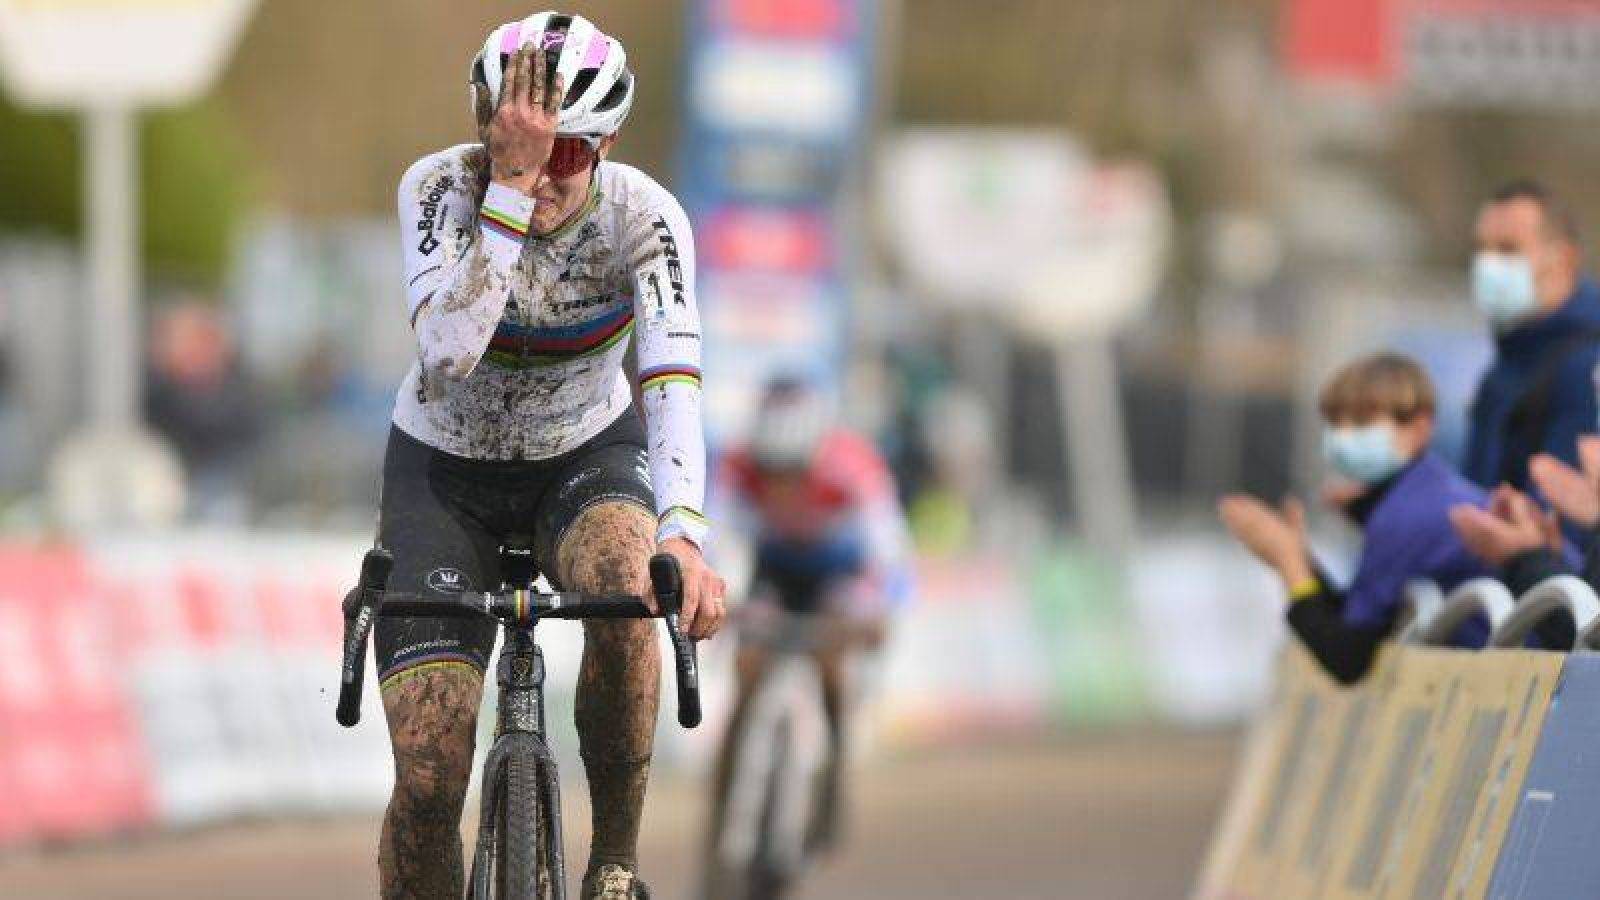 Dutch Lucinda Brand celebrates as she crosses the finish line to win the women's elite race of the GP Sven Nys, the fourth stage (4/8) in the Trofee Veldrijden Cyclocross competition, Saturday 01 January 2022 in Baal, Belgium.
BELGA PHOTO DAVID STOCKMAN